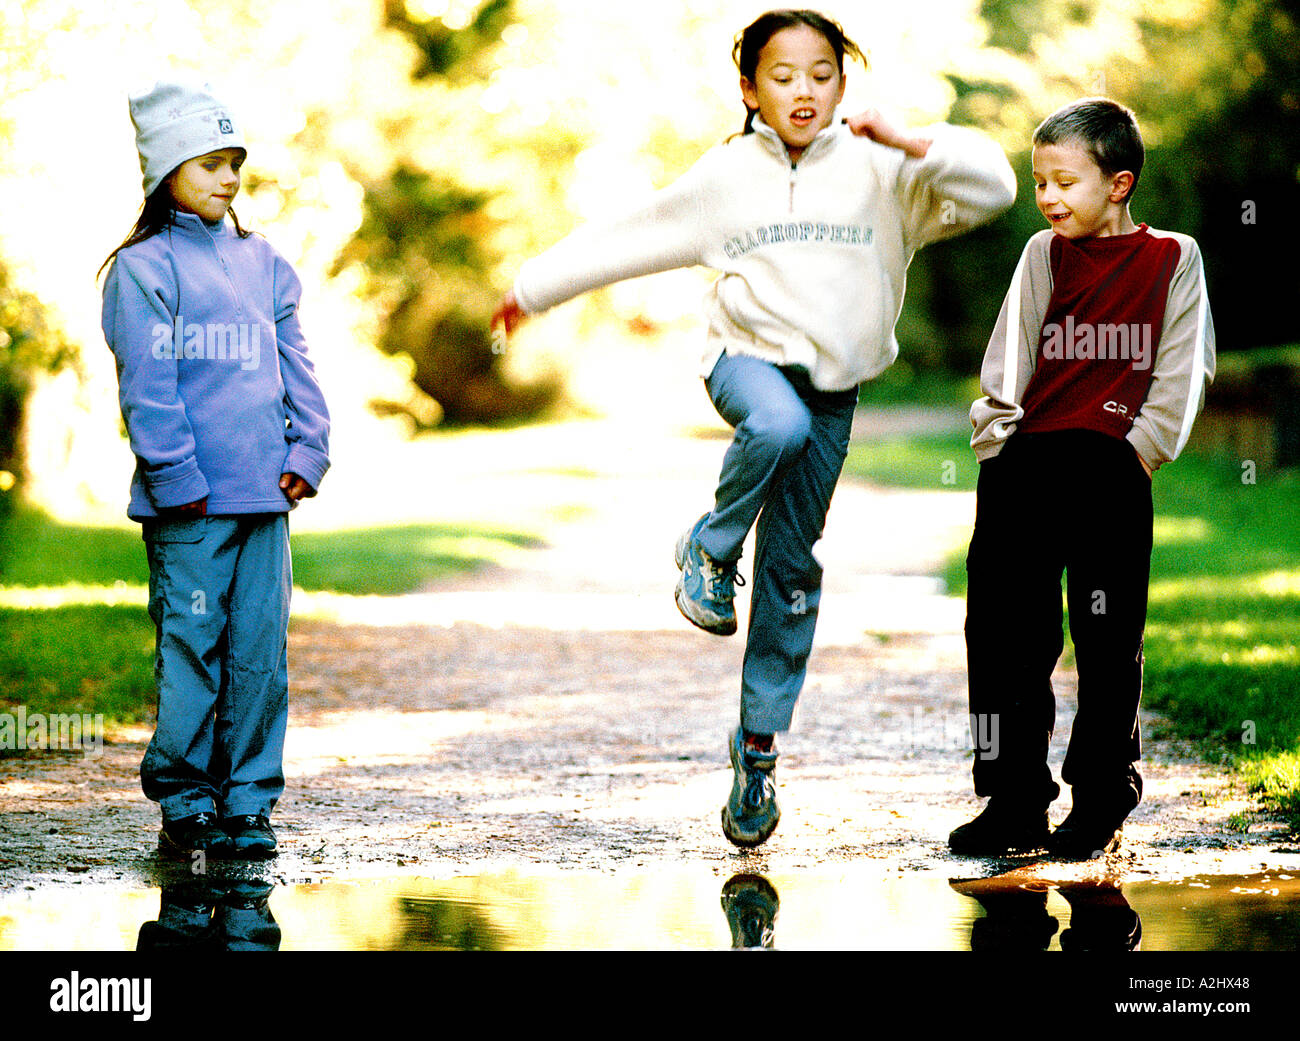 3 children age 6-8 playing in a park, 2 are girls and 1 is a boy. Stock Photo